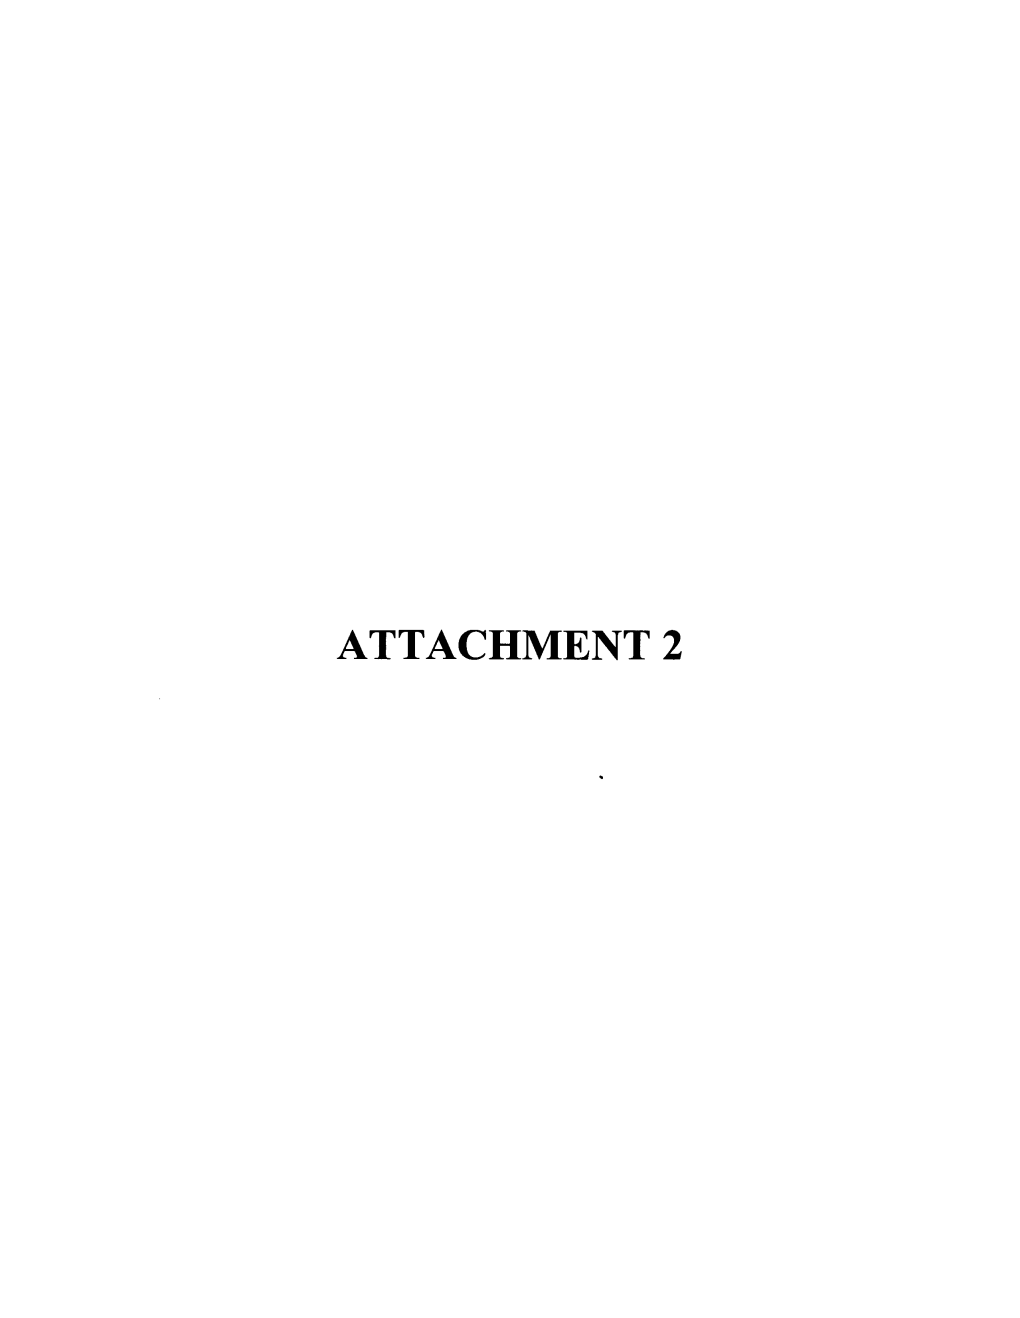 Attachment 2 Hdmi Specification Adopter Agreement